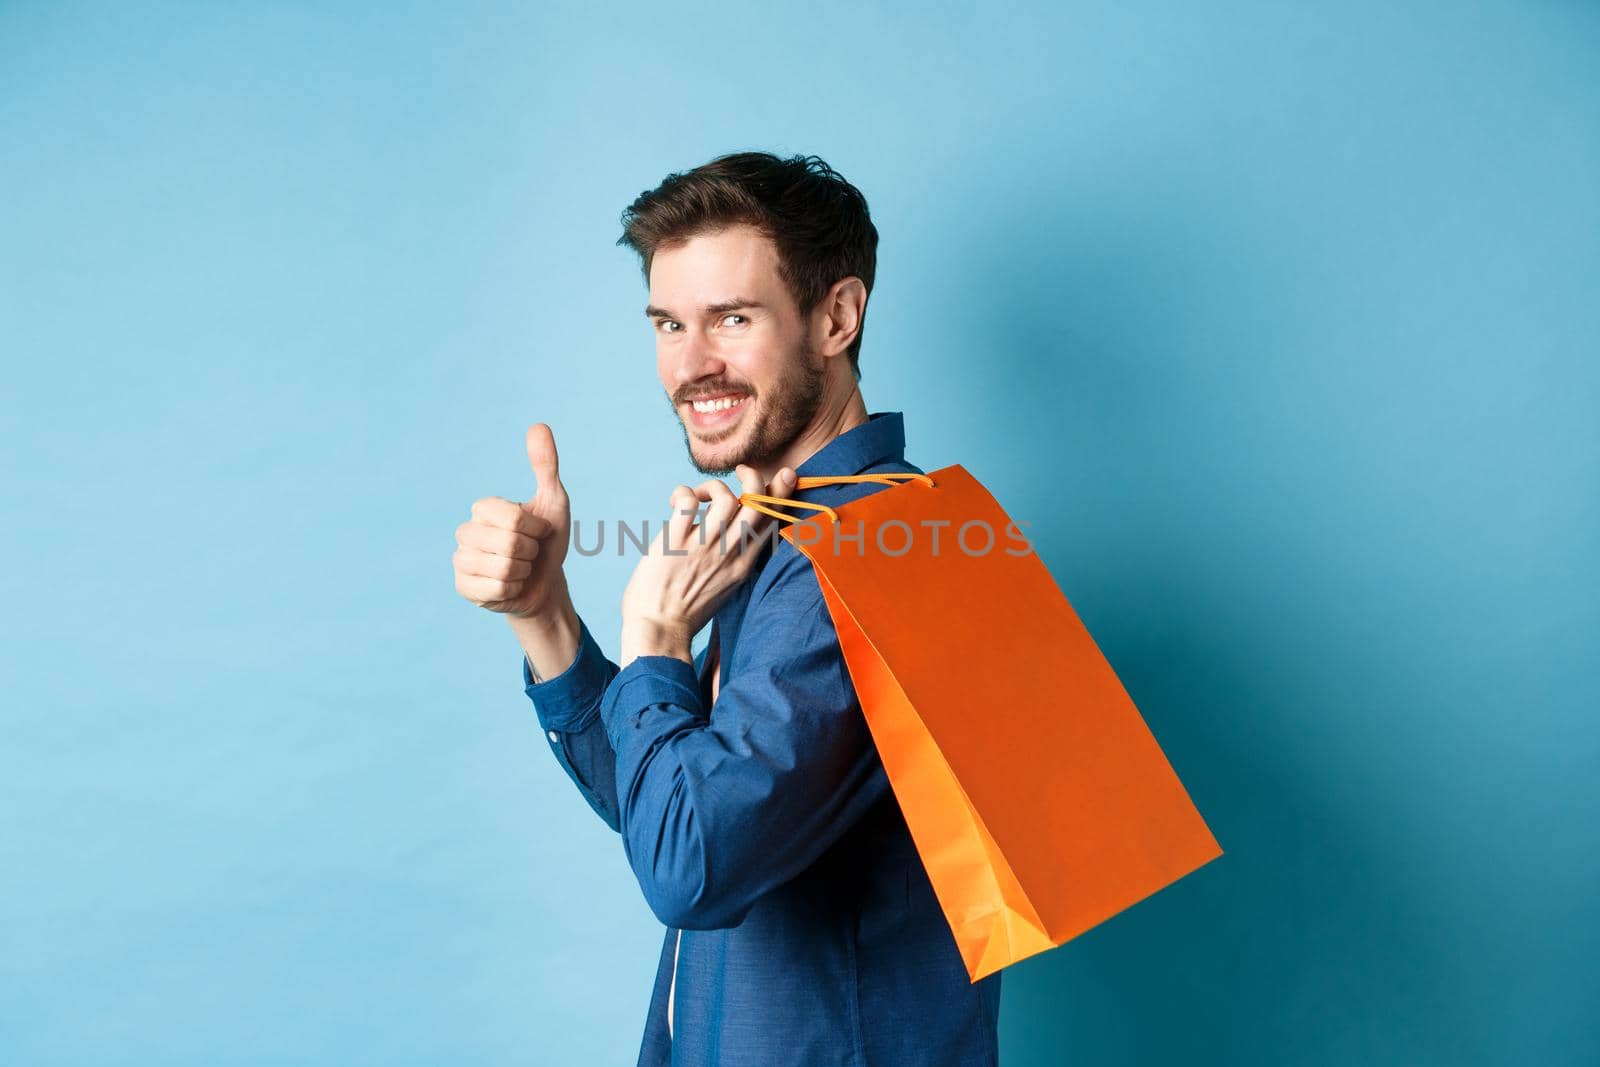 Cheerful shopper holding orange shopping bag on shoulder, turn around at camera with thumbs up, recommending store, blue background.